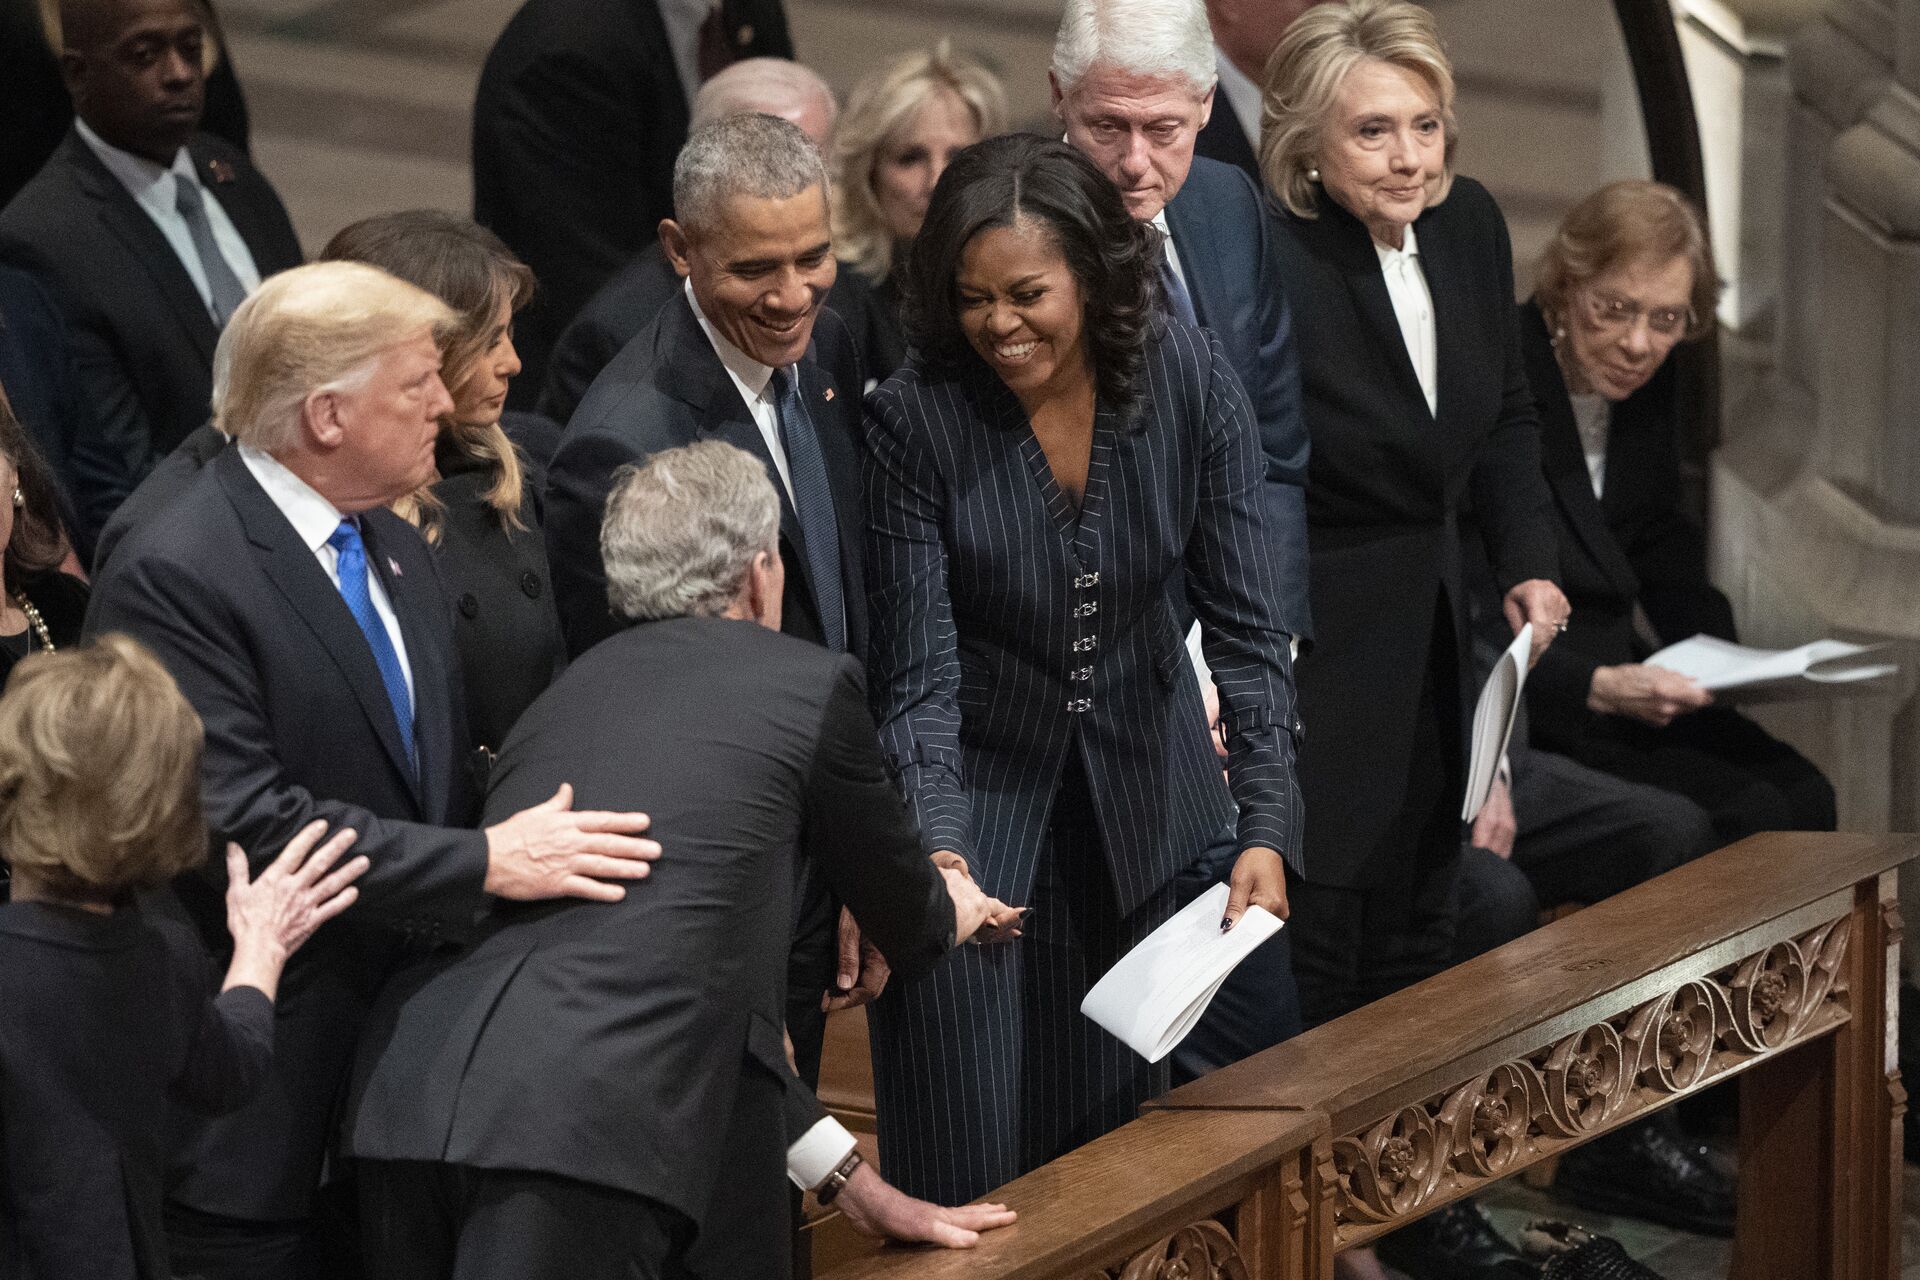 President George W. Bush and wife Laura Bush greets President Donald Trump, first lady Melania Trump, former President Barack Obama, Michelle Obama, former President Bill Clinton, former Secretary of State Hillary Clinton, former President Jimmy Carter, and Rosalynn Carter during a State Funeral for former President George H.W. Bush at the National Cathedral, Wednesday, Dec. 5, 2018, in Washington. - Sputnik International, 1920, 20.12.2021